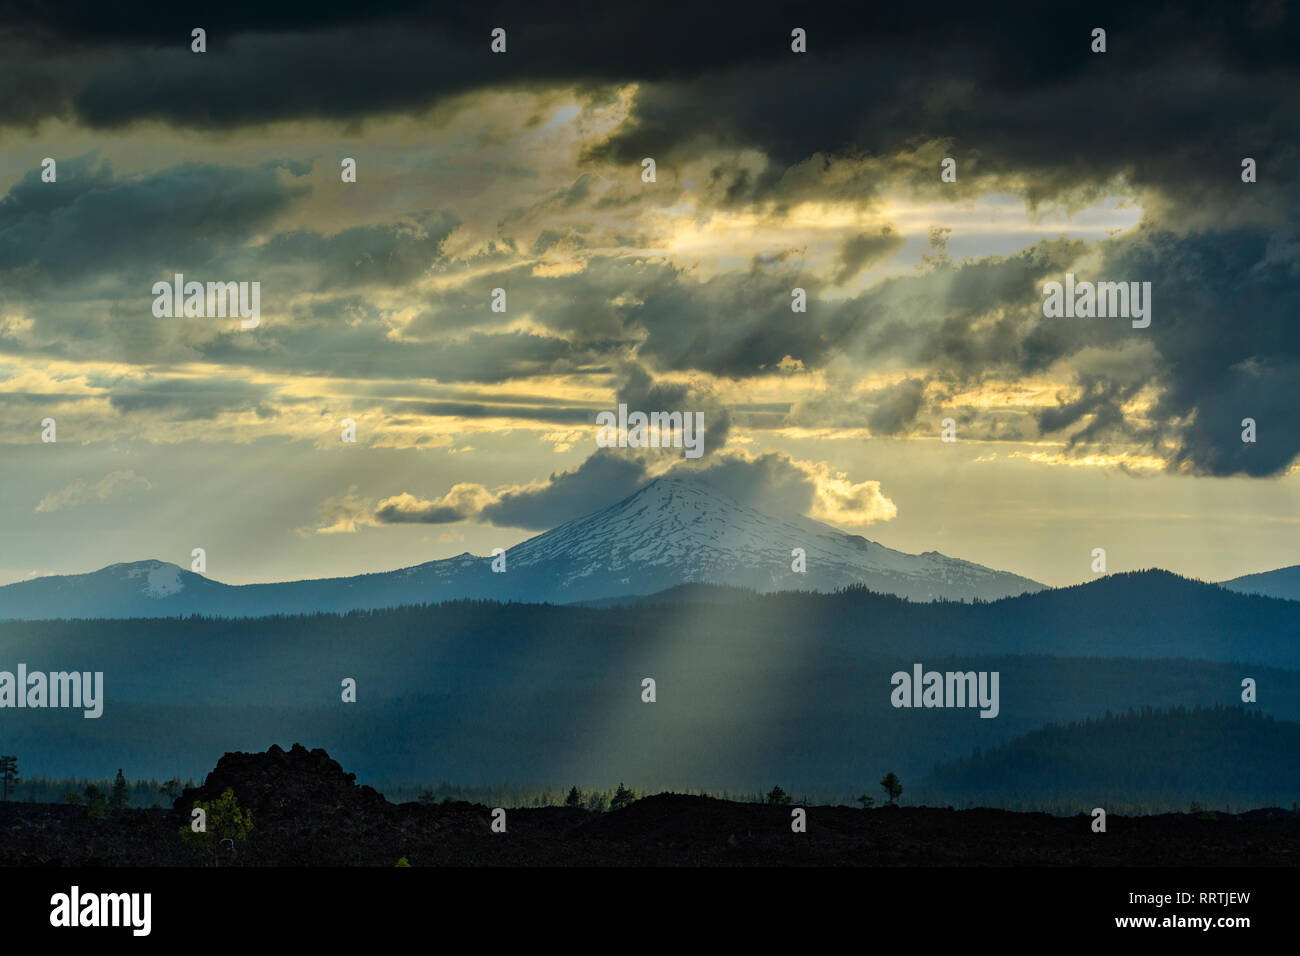 North America, America, USA, American, Oregon, Central, Cascade Mountains, Mount Bachelor at sunset Stock Photo